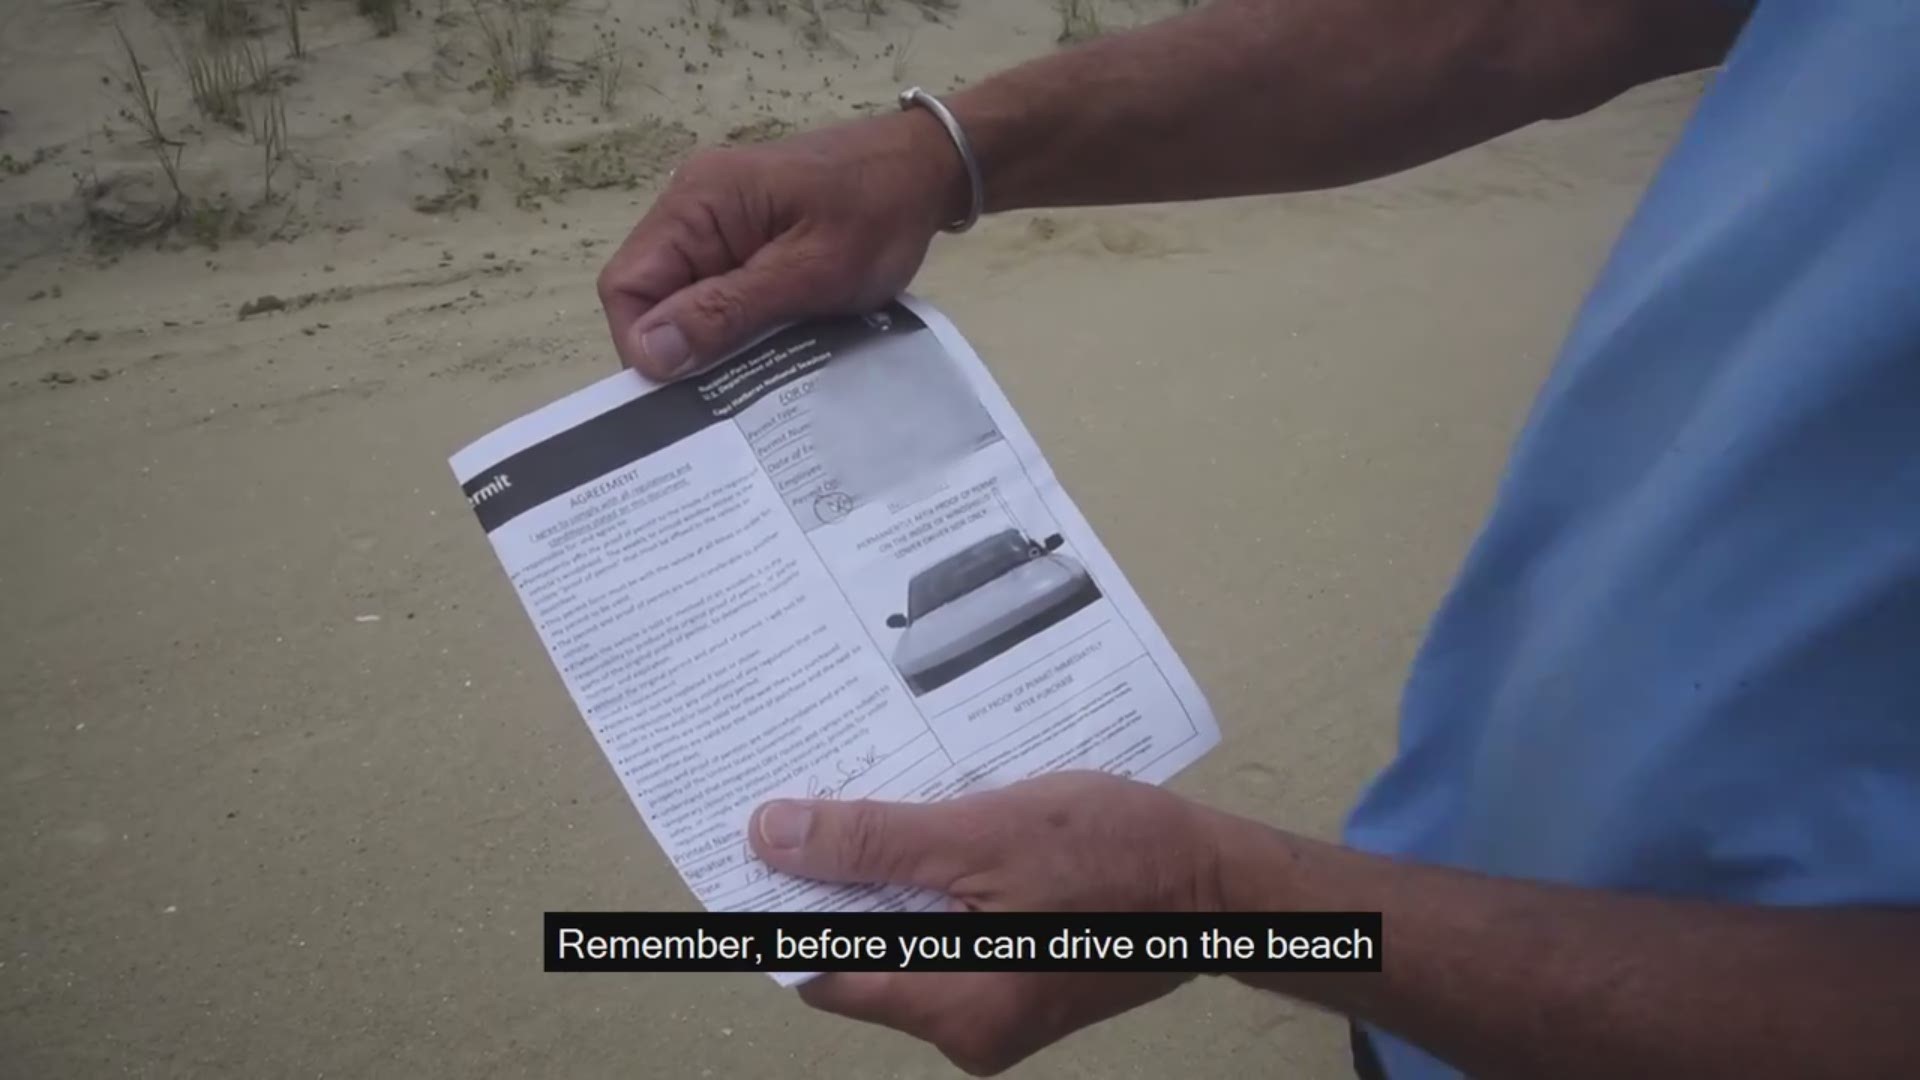 Cape Hatteras National Seashore recently released a new Off-Road Vehicle (ORV) Safety Video. Whether you walk, run or drive, you need to be safe because we all share this beautiful space.